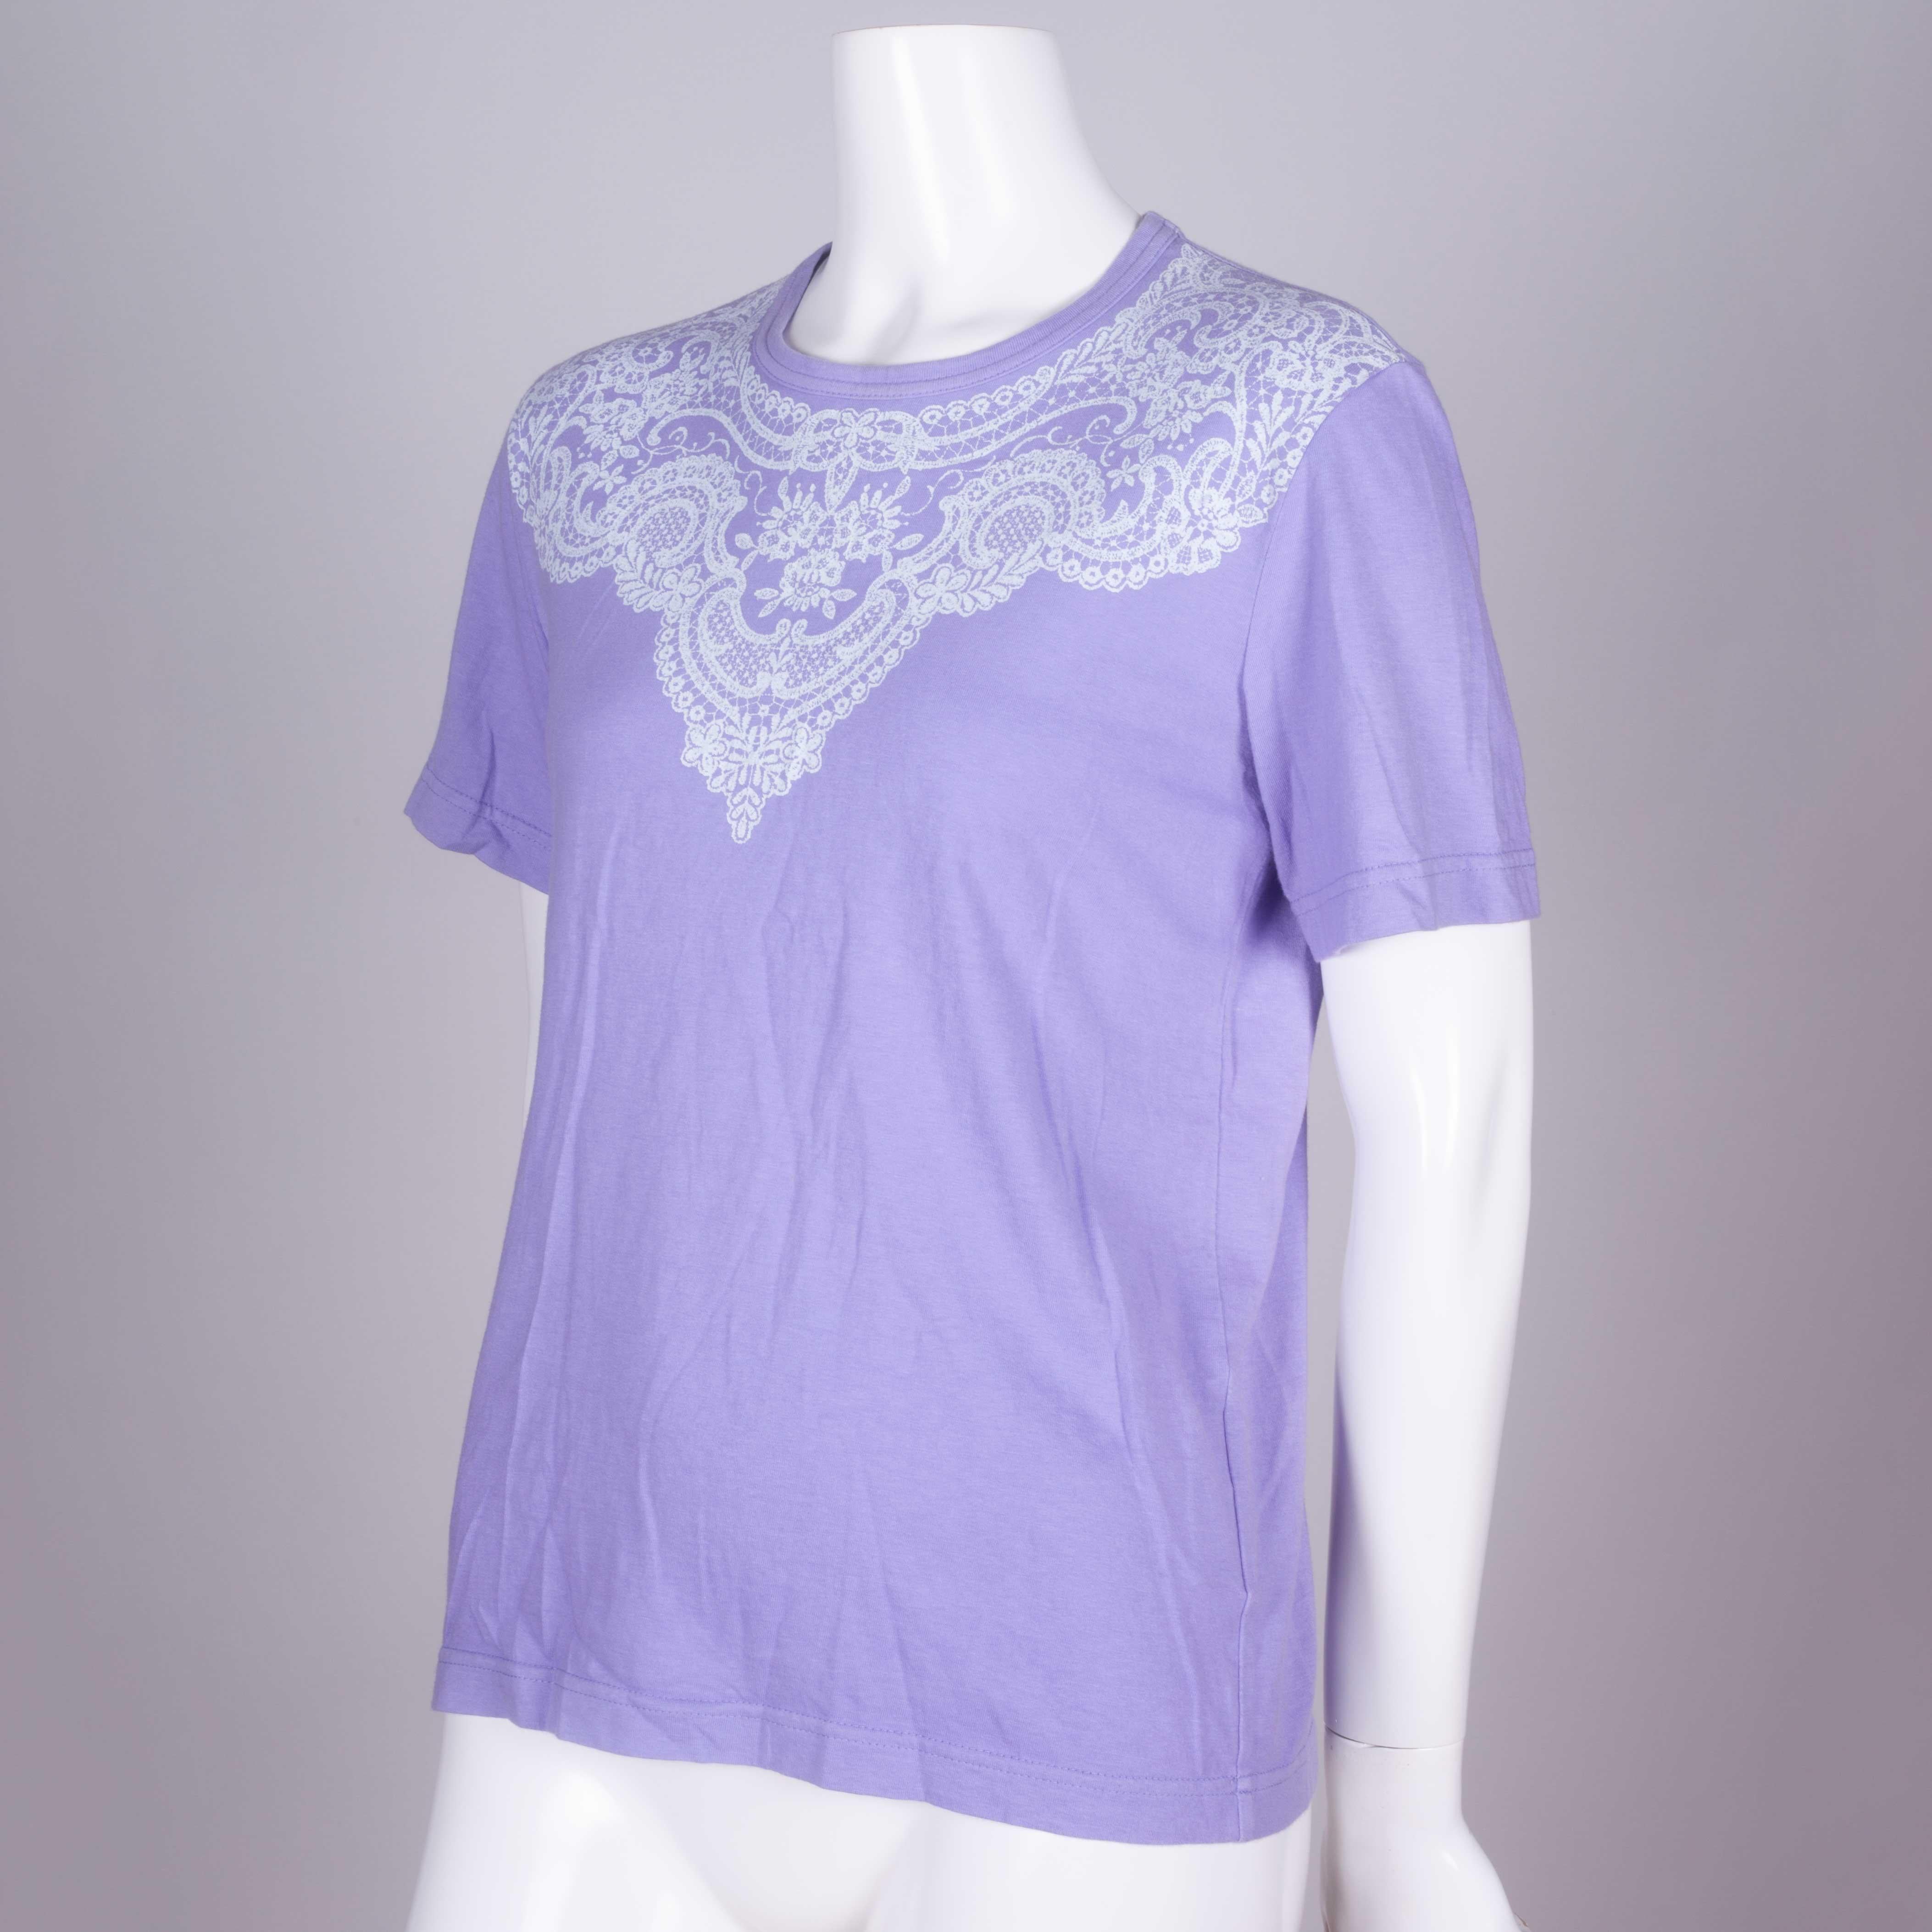 Comme des Garçons 2006 purple short sleeve t-shirt from Japan with lace motif around collar. Dainty lace screen print adds a soft organic embellishment to this casual, everyday tee in lilac color. 

YEAR: 2006
MARKED SIZE: No size marked
FIT: